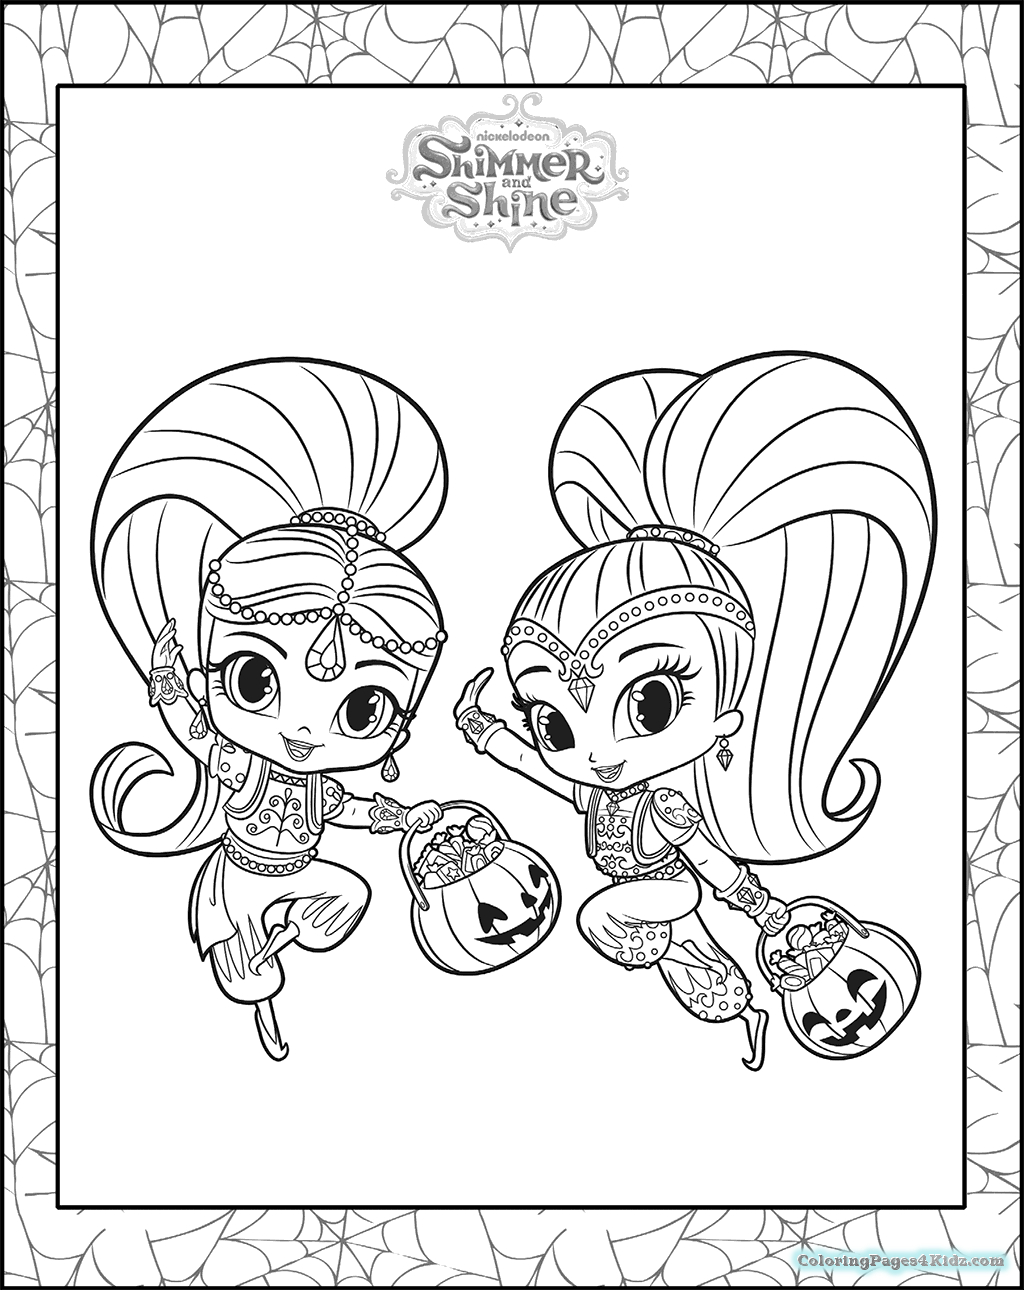 Shimmer And Shine Coloring Pages To Print Shimmer And Shine Halloween Coloring Pages